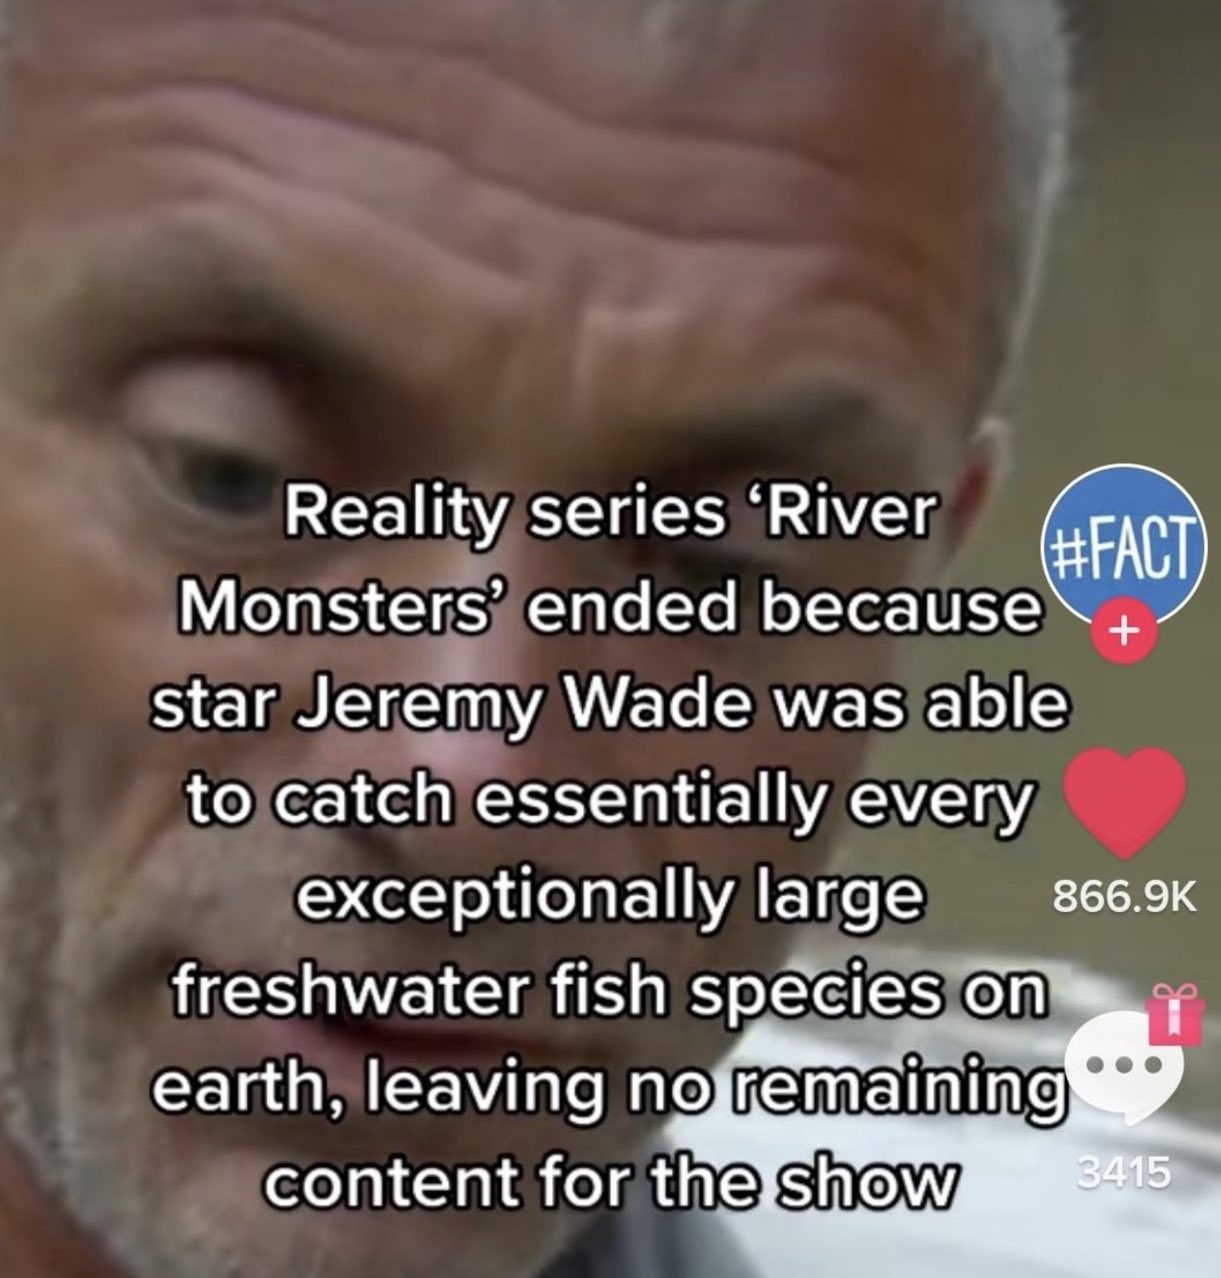 dudes posting wins - monterrey mexico - Reality series 'River Monsters' ended because star Jeremy Wade was able to catch essentially every exceptionally large freshwater fish species on earth, leaving no remaining content for the show 3415